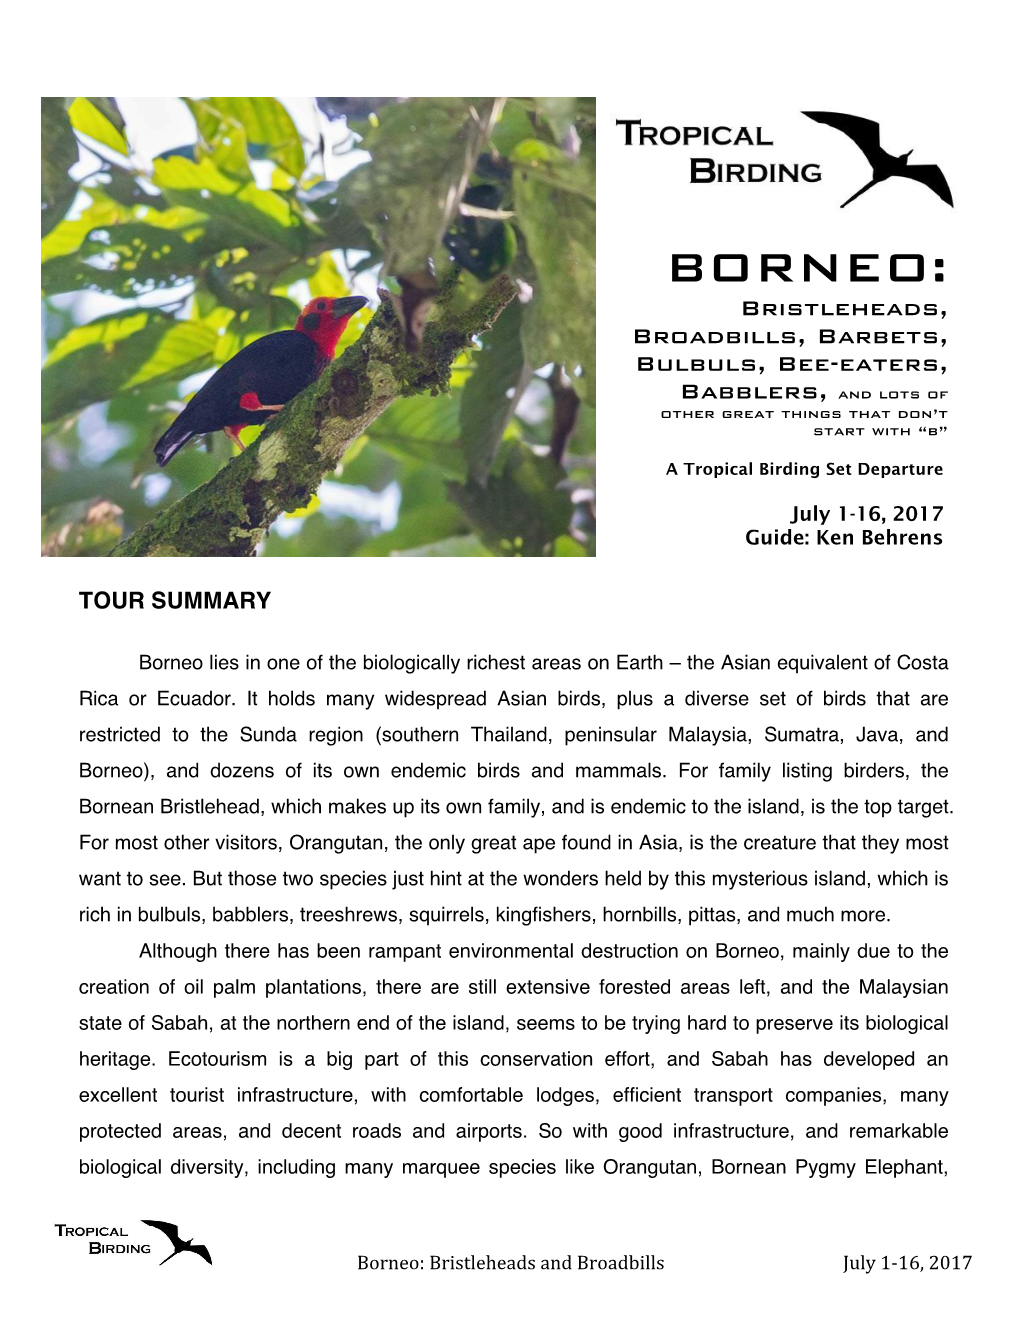 BORNEO: Bristleheads, Broadbills, Barbets, Bulbuls, Bee-Eaters, Babblers, and Lots of Other Great Things That Don’T Start with “B”